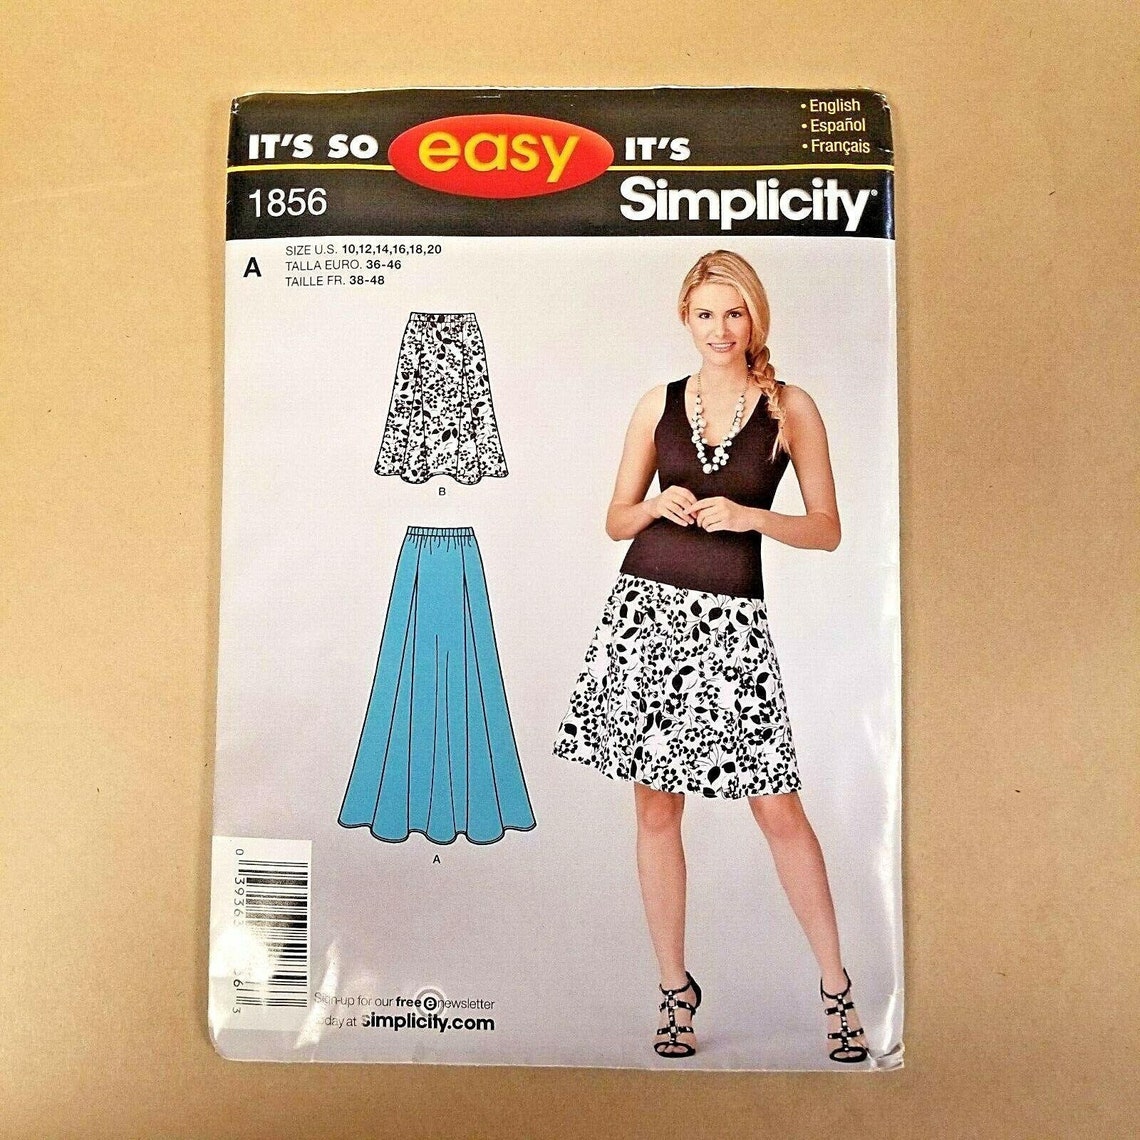 Simplicity Pattern its so Easy Womens Sz US 10-20 | Etsy